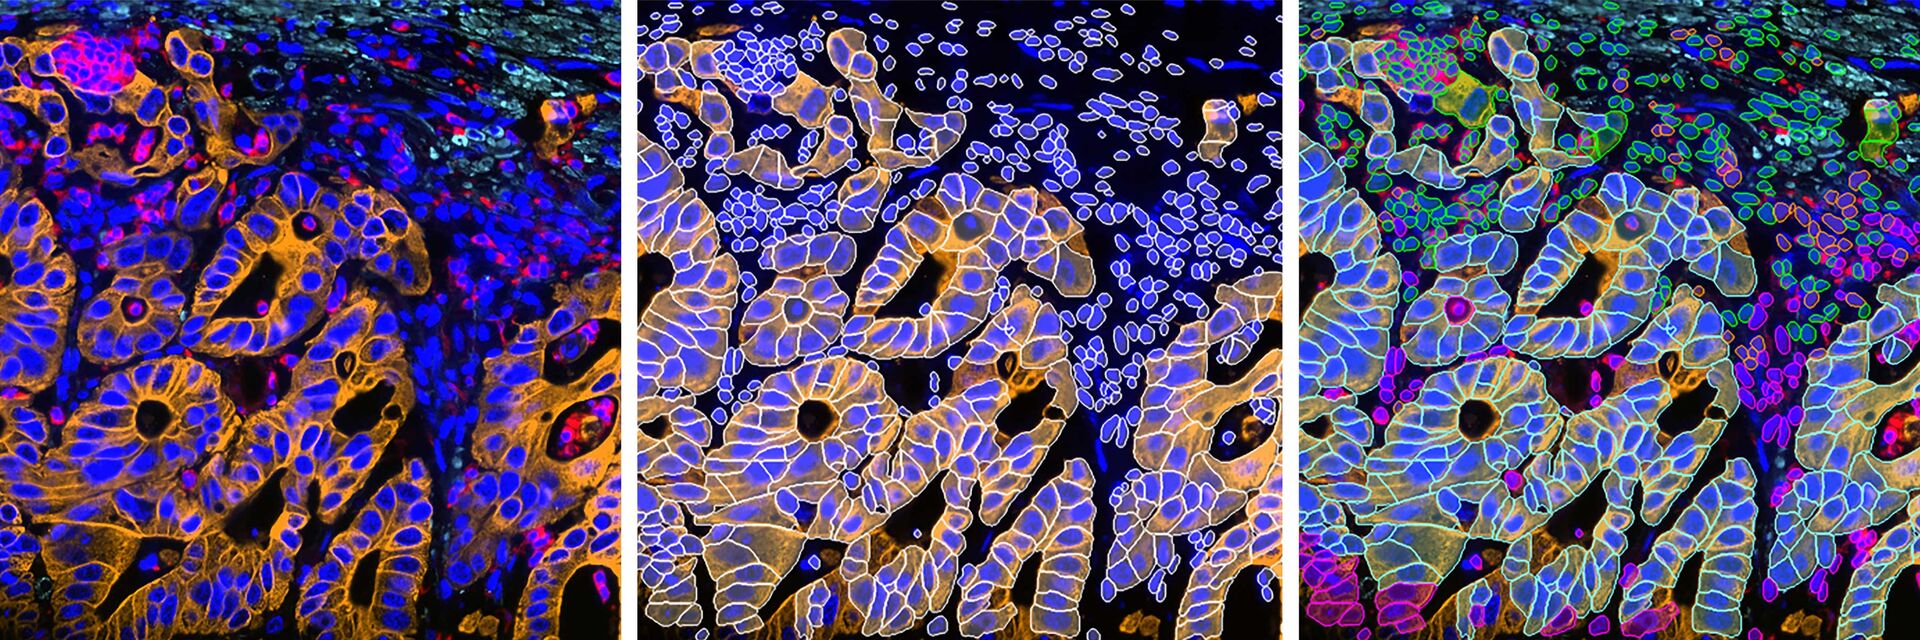 2D slice of colon cancer tissue stained with 30 markers and imaged using the Cell DIVE system. 